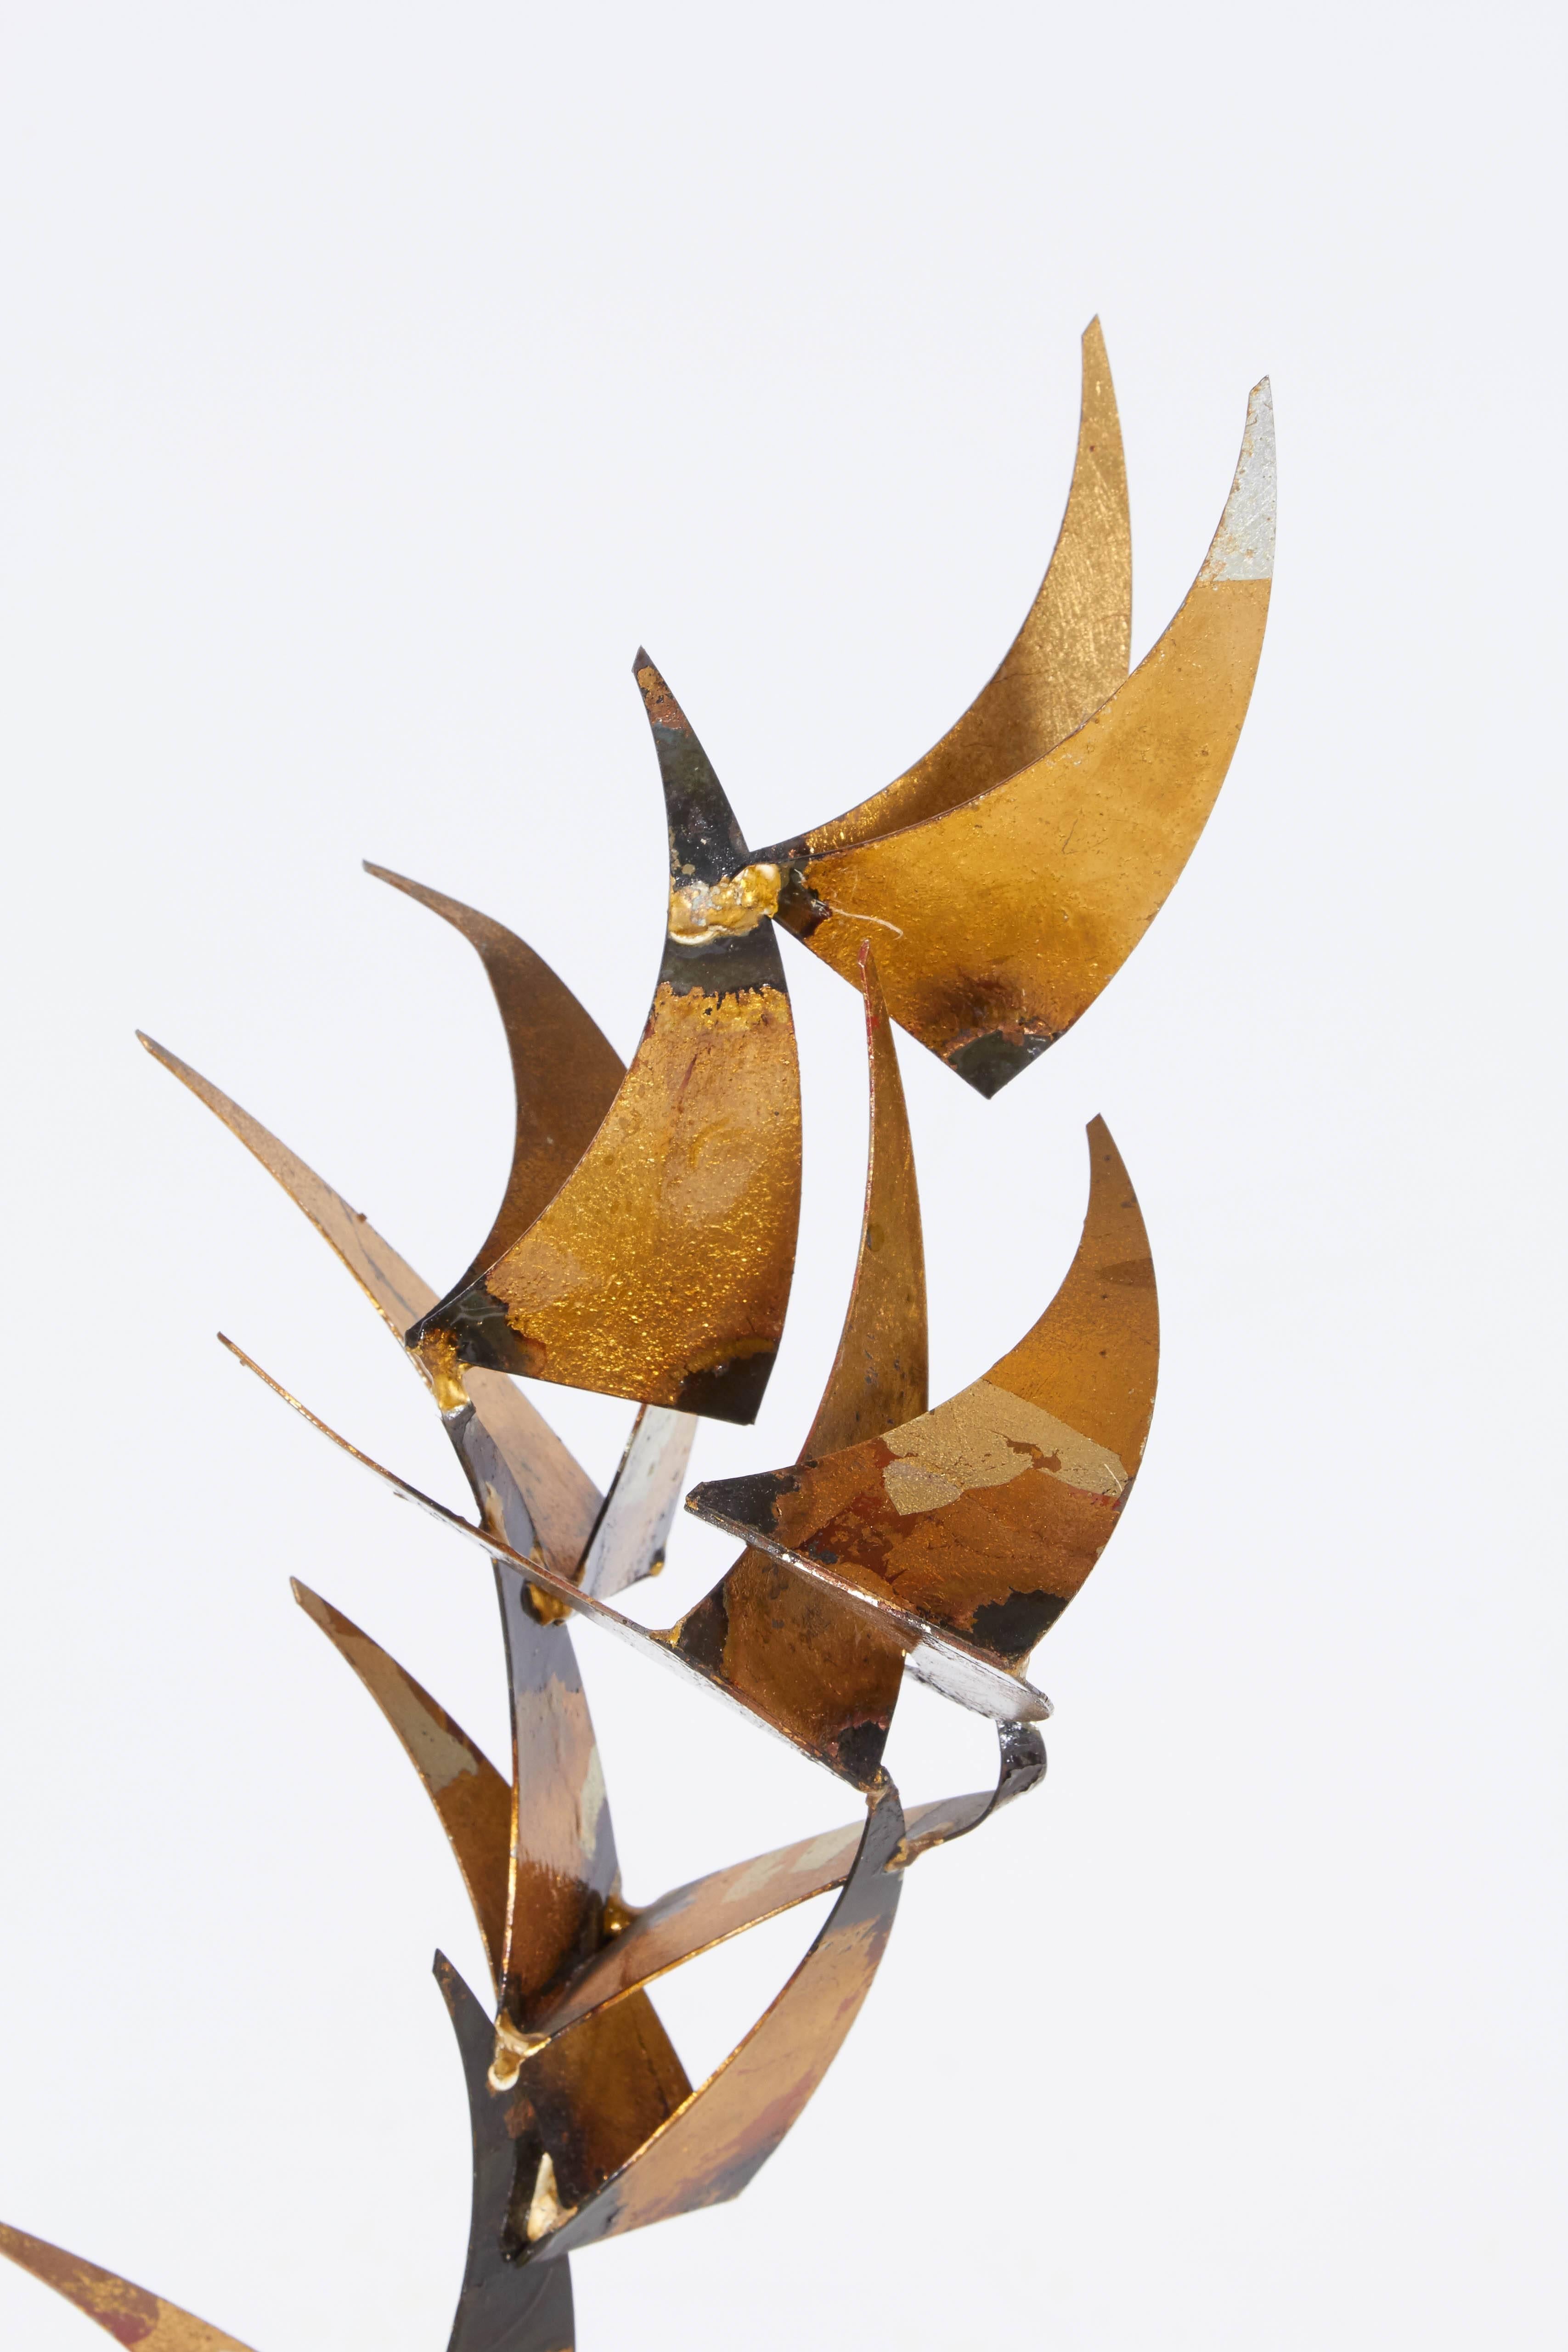 Whimsical Tabletop Sculpture by William Bowie 1